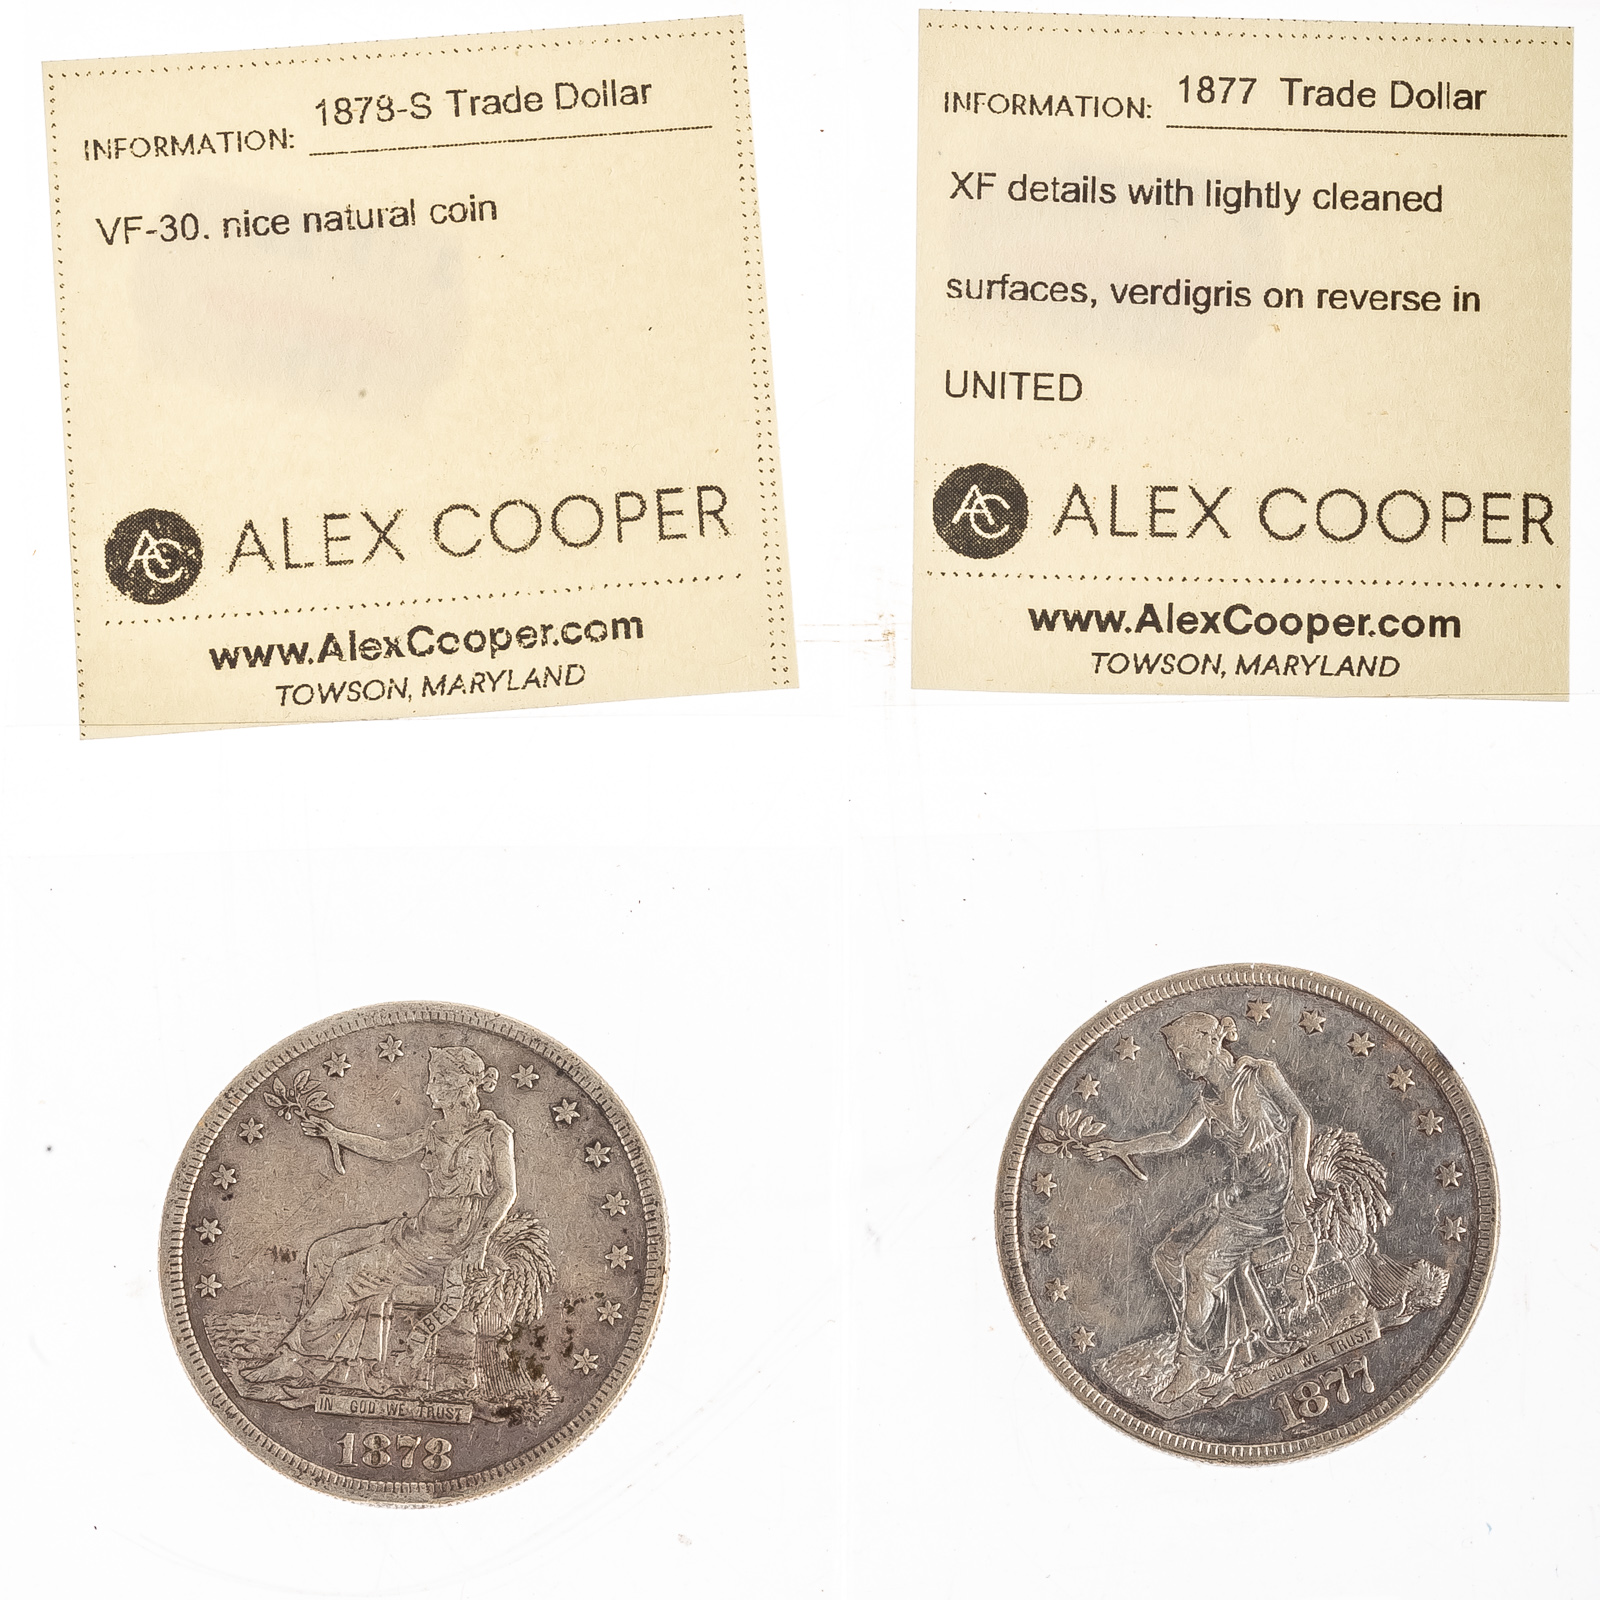 TWO TRADE DOLLARS 1877 XF DETAILS